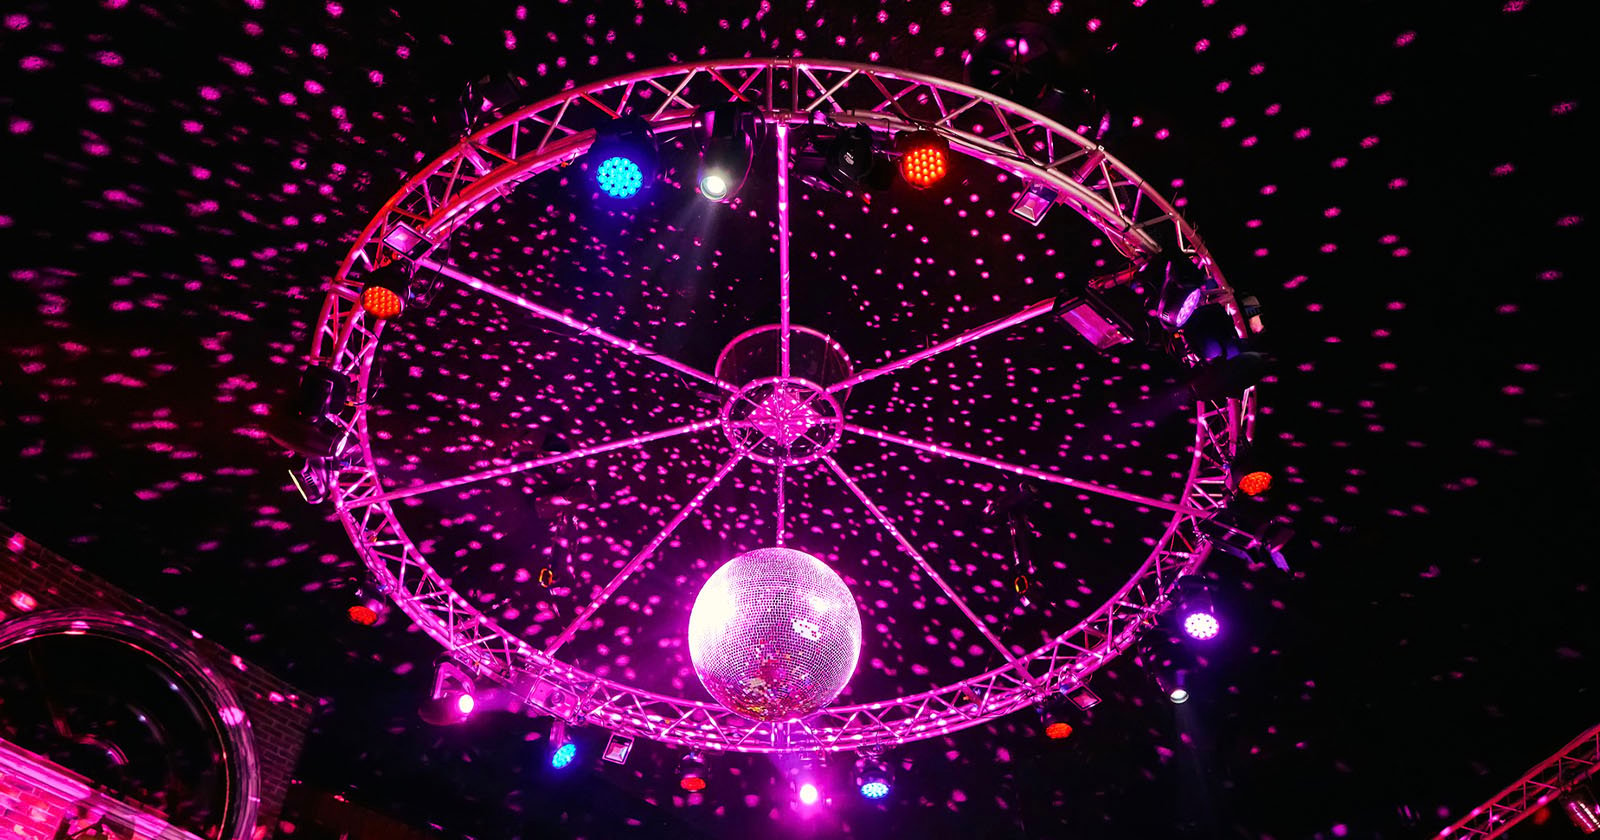  astronomers want more disco balls installed observatories 